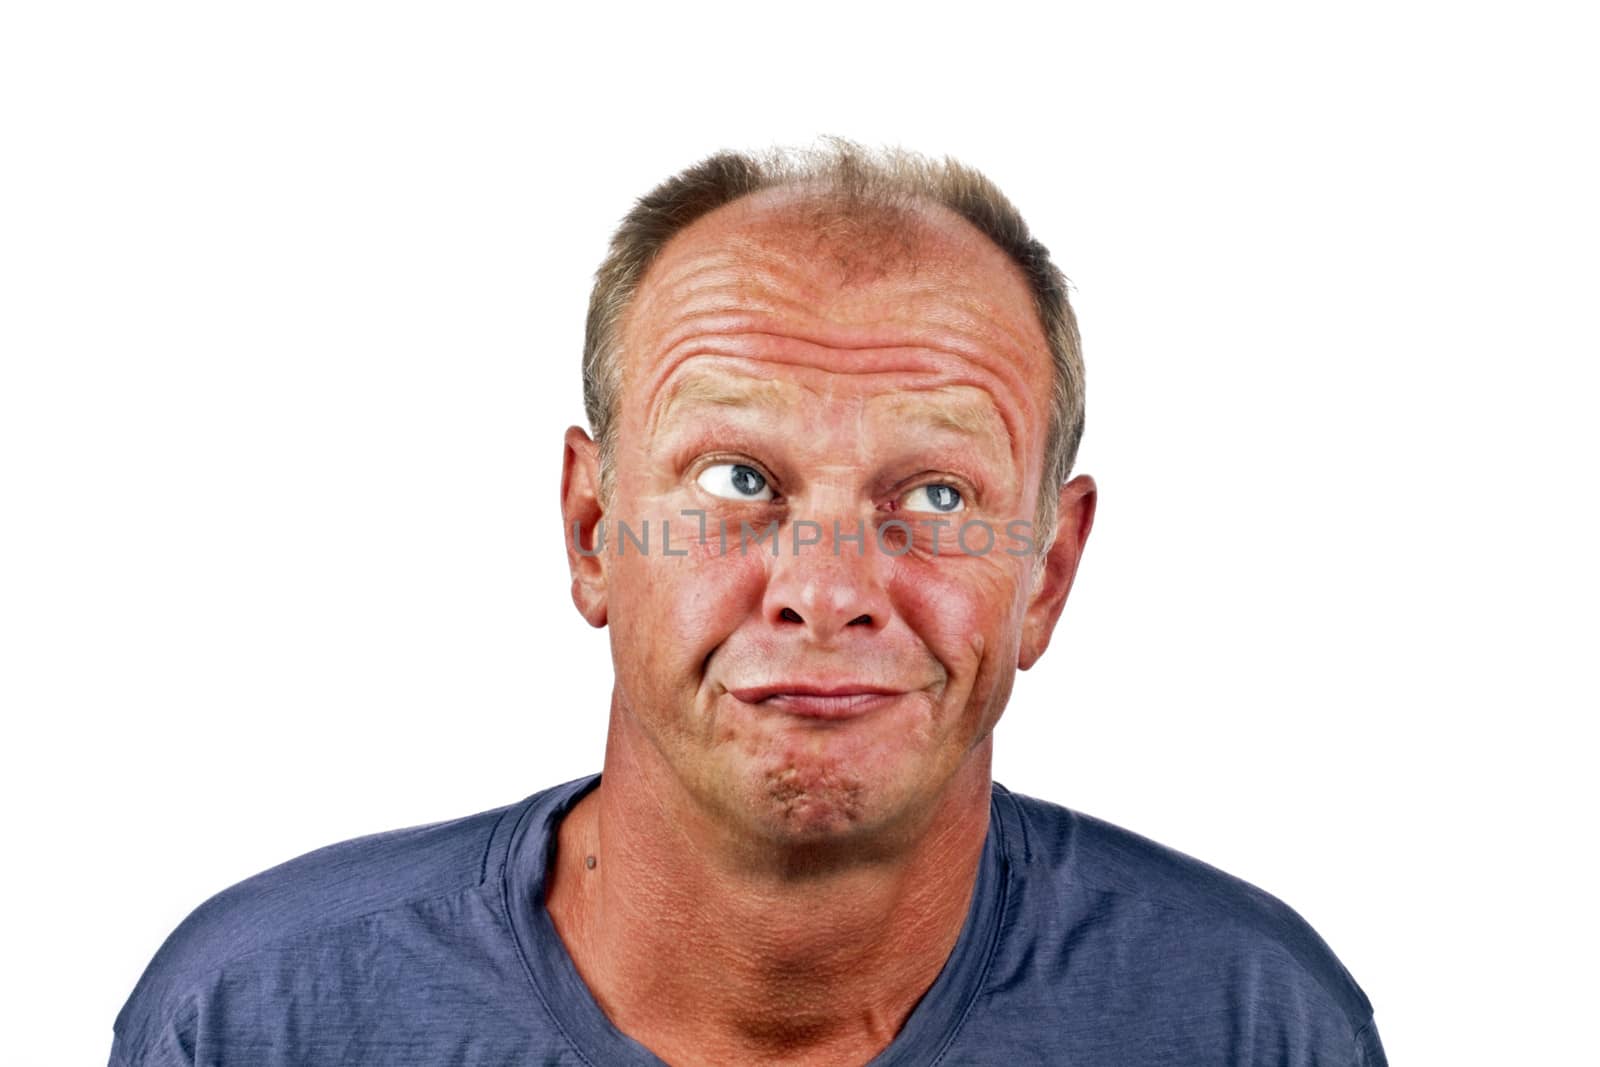 Astonished looking man on a white background